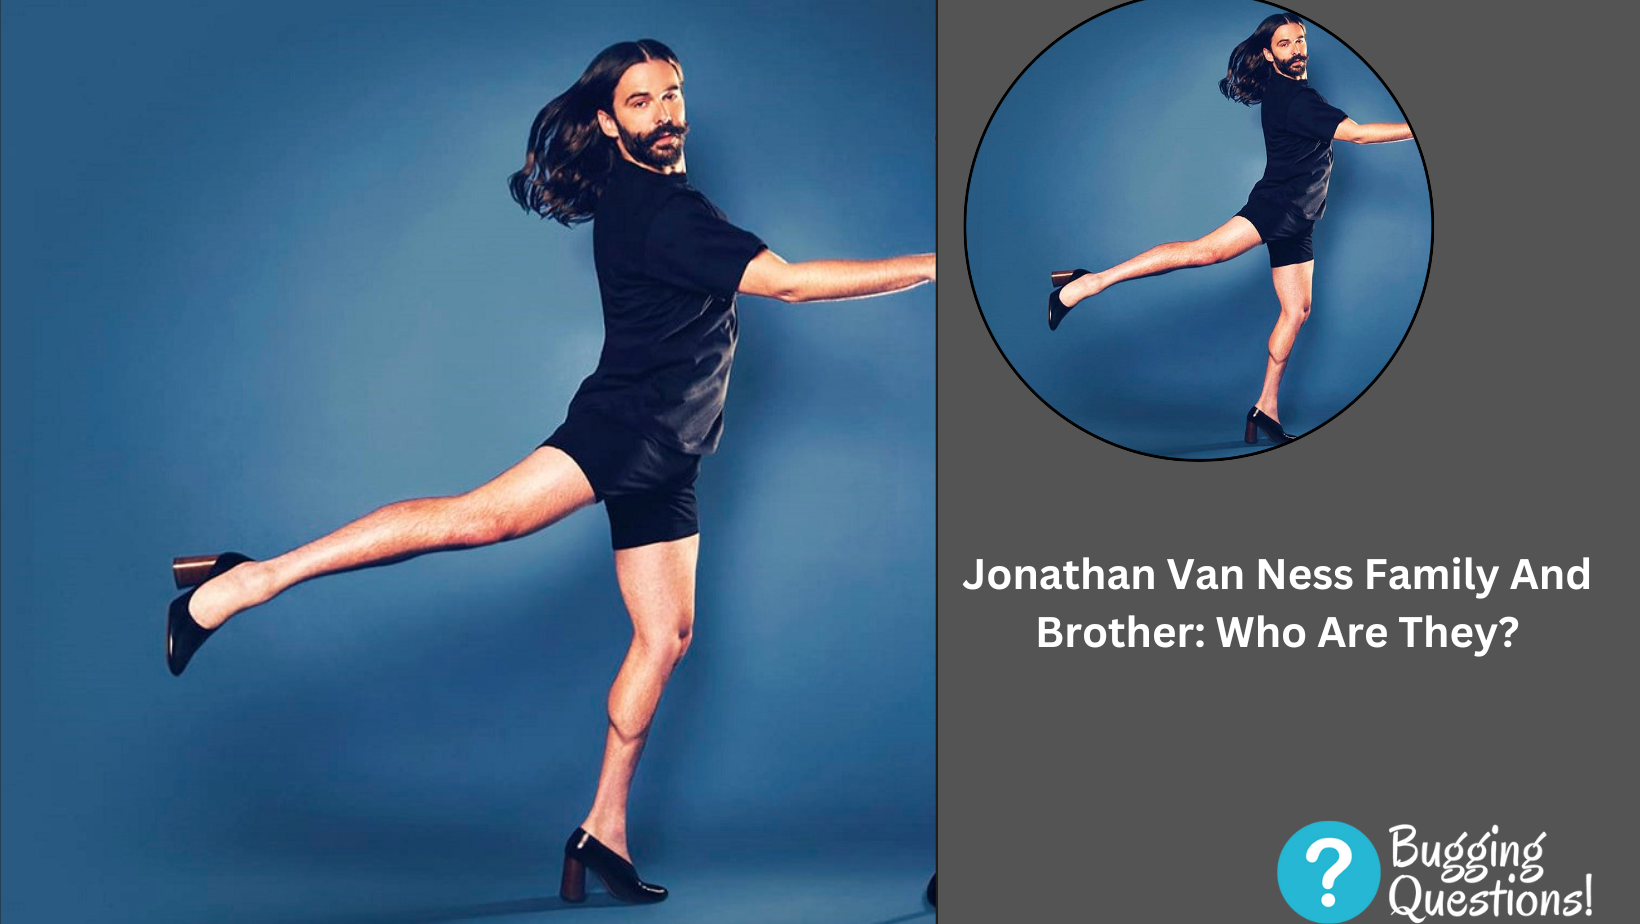 Jonathan Van Ness Family And Brother: Who Are They?